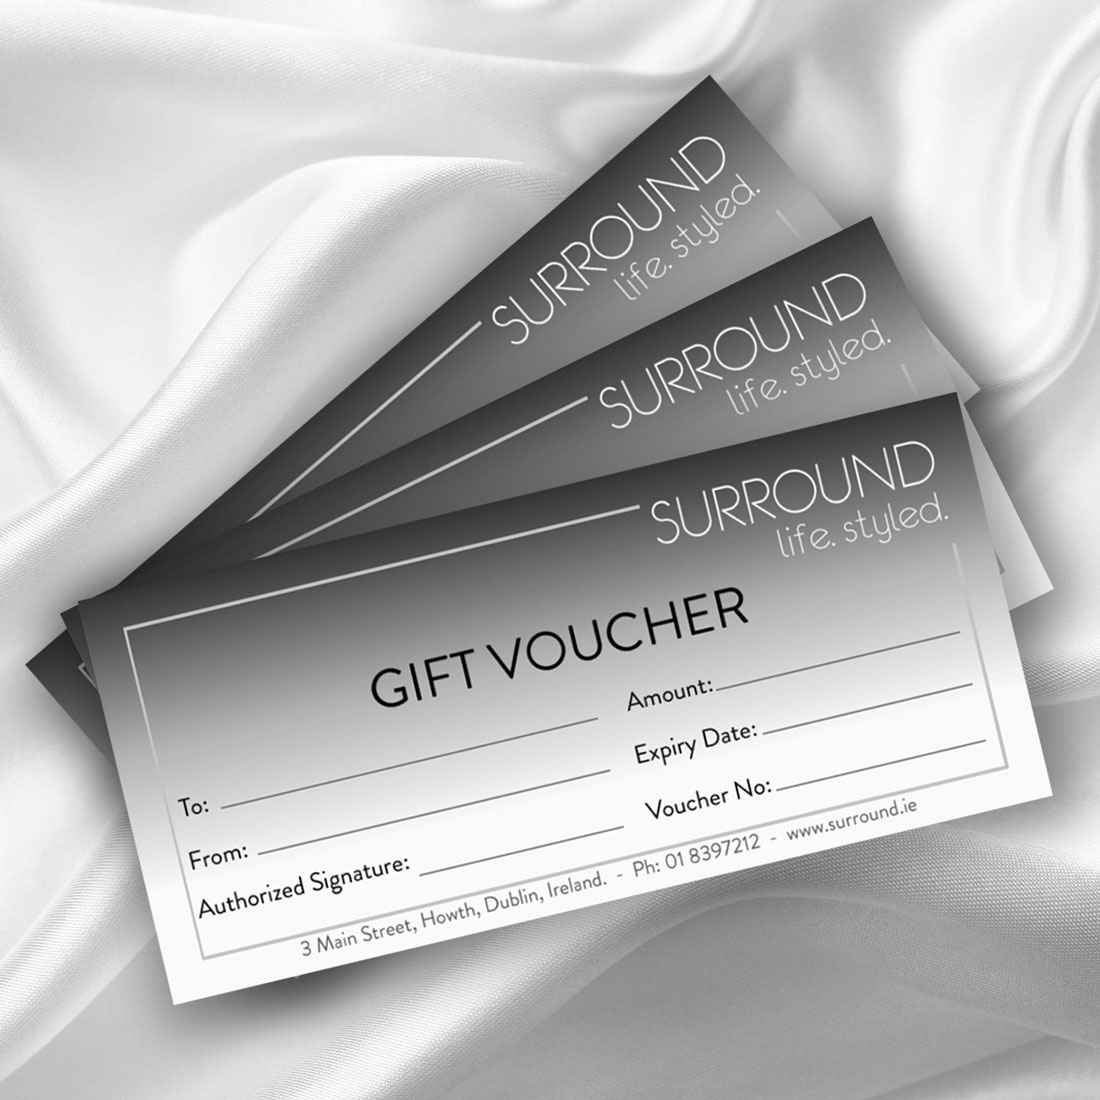 gift-vouchers-now-available-surround-howth-north-dublin